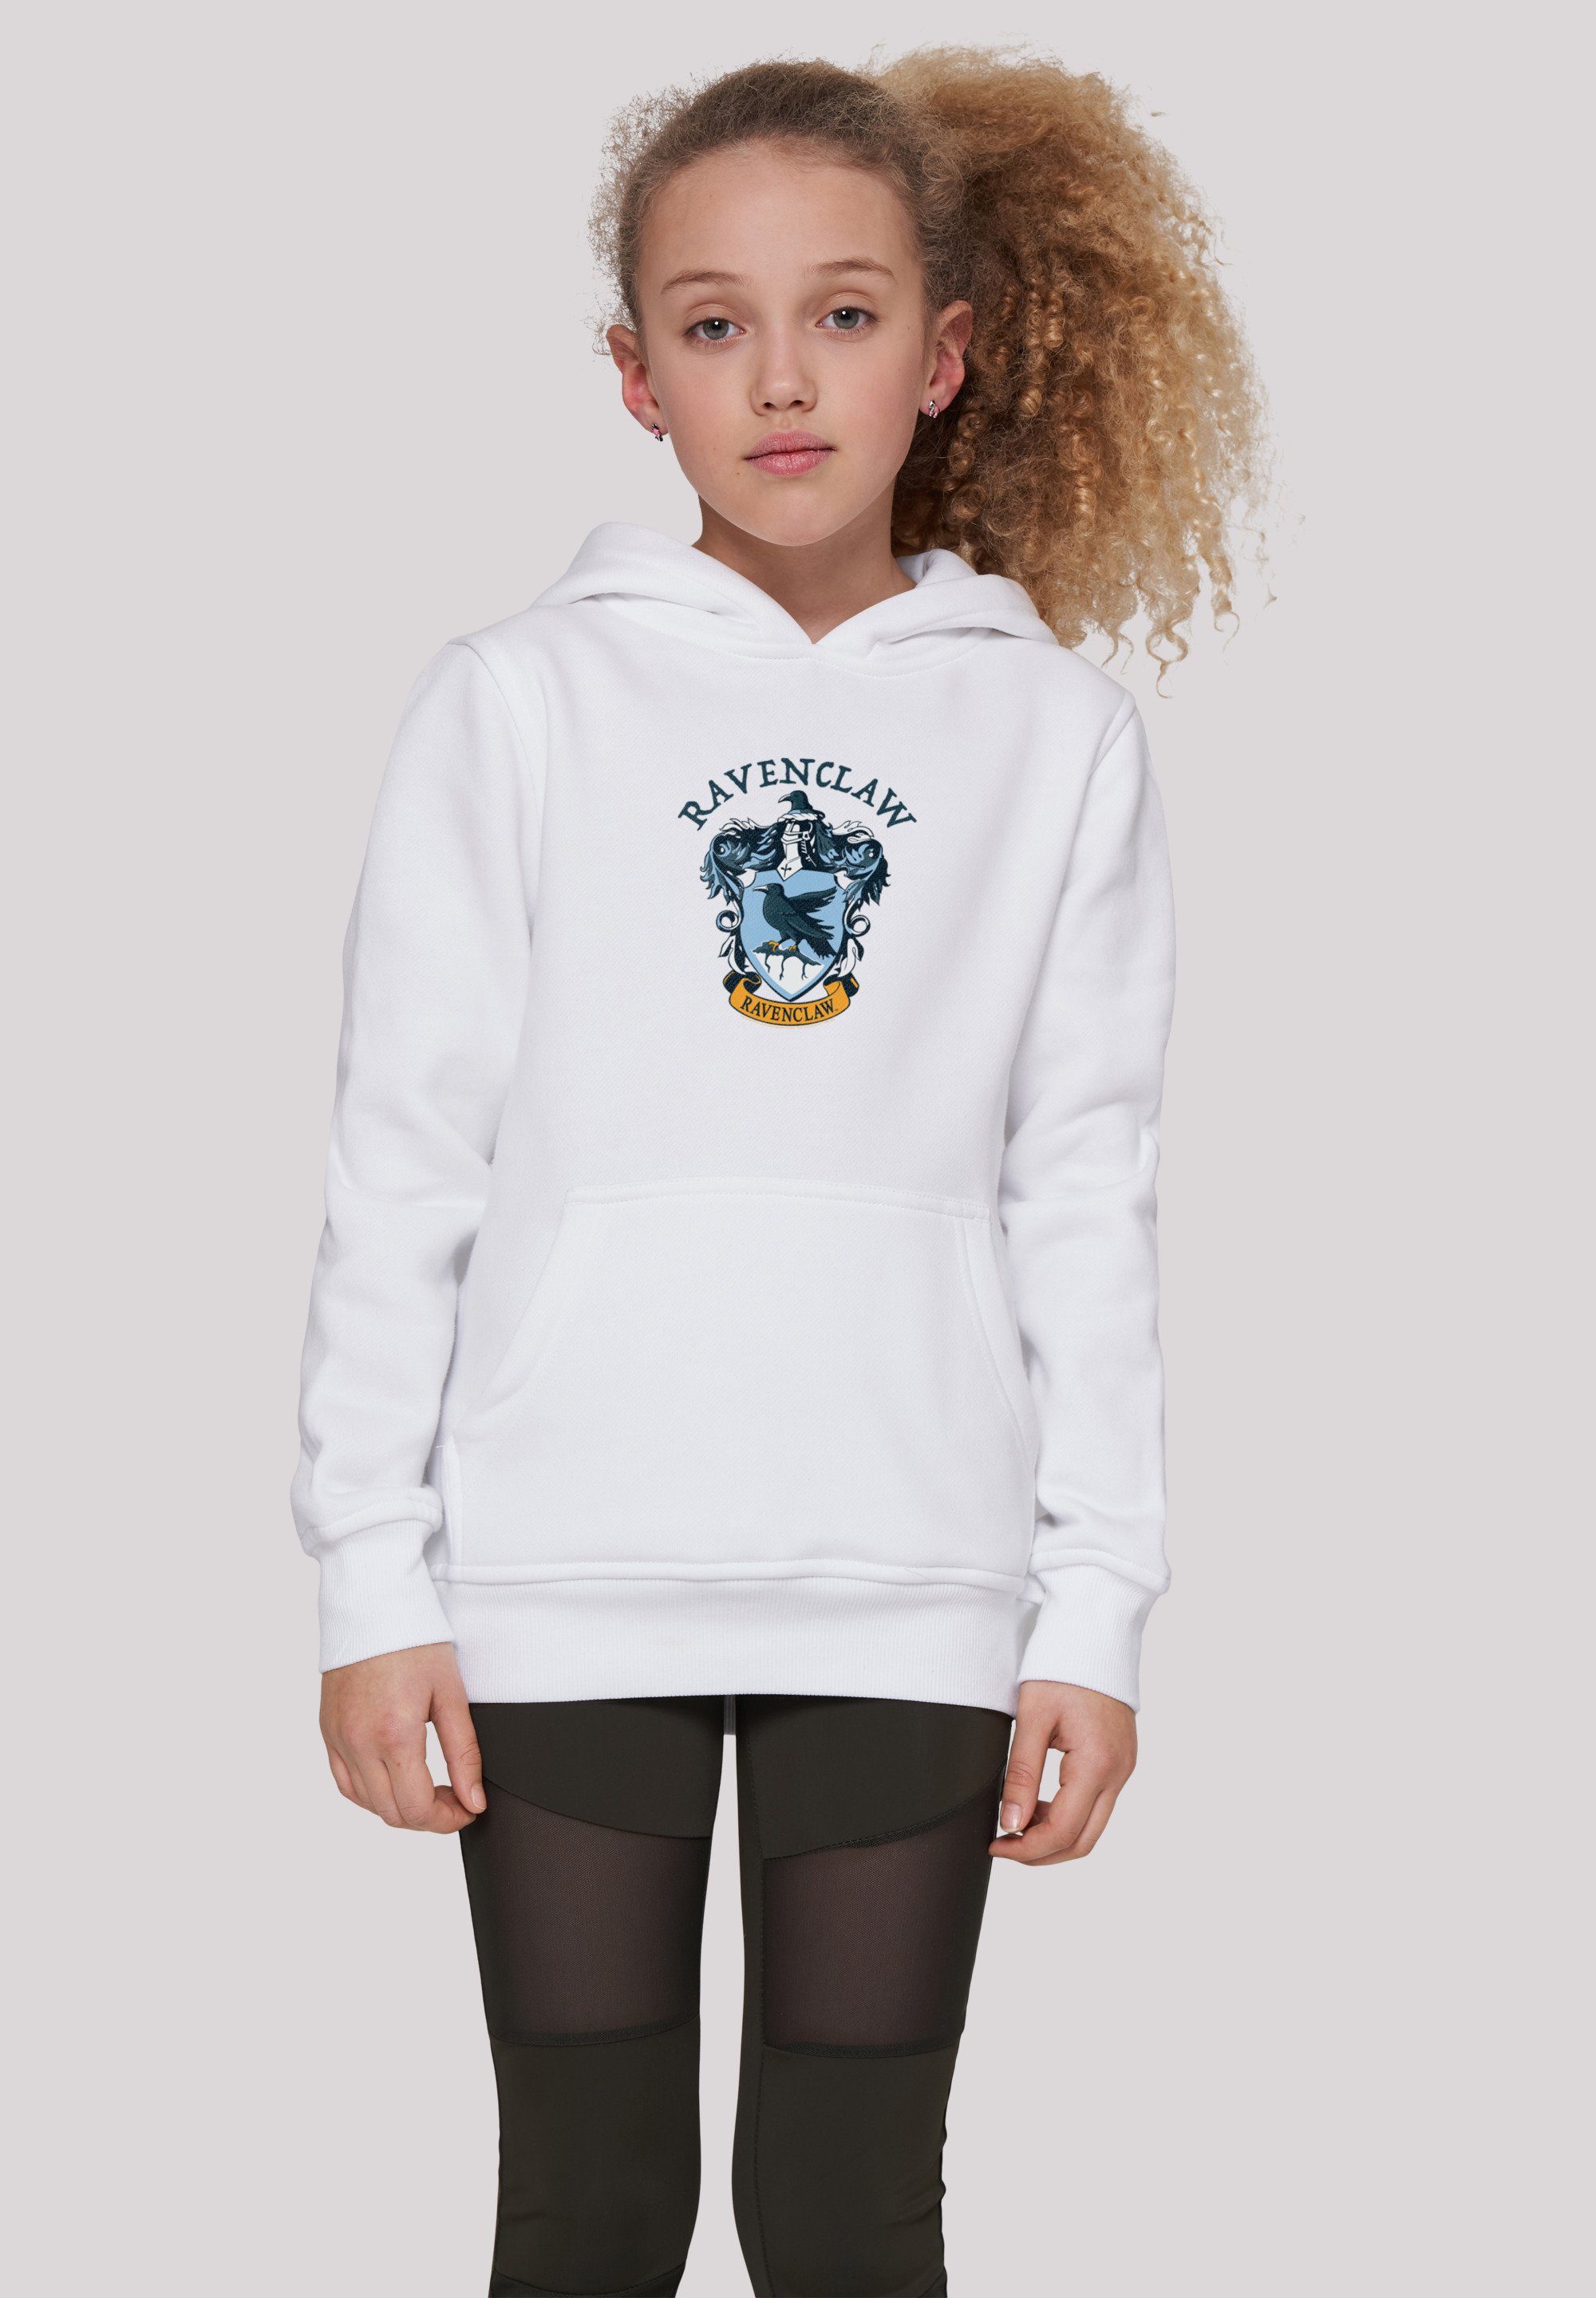 F4NT4STIC Hoodie Kinder Harry Kids Potter white Hoody with (1-tlg) Ravenclaw Basic Crest